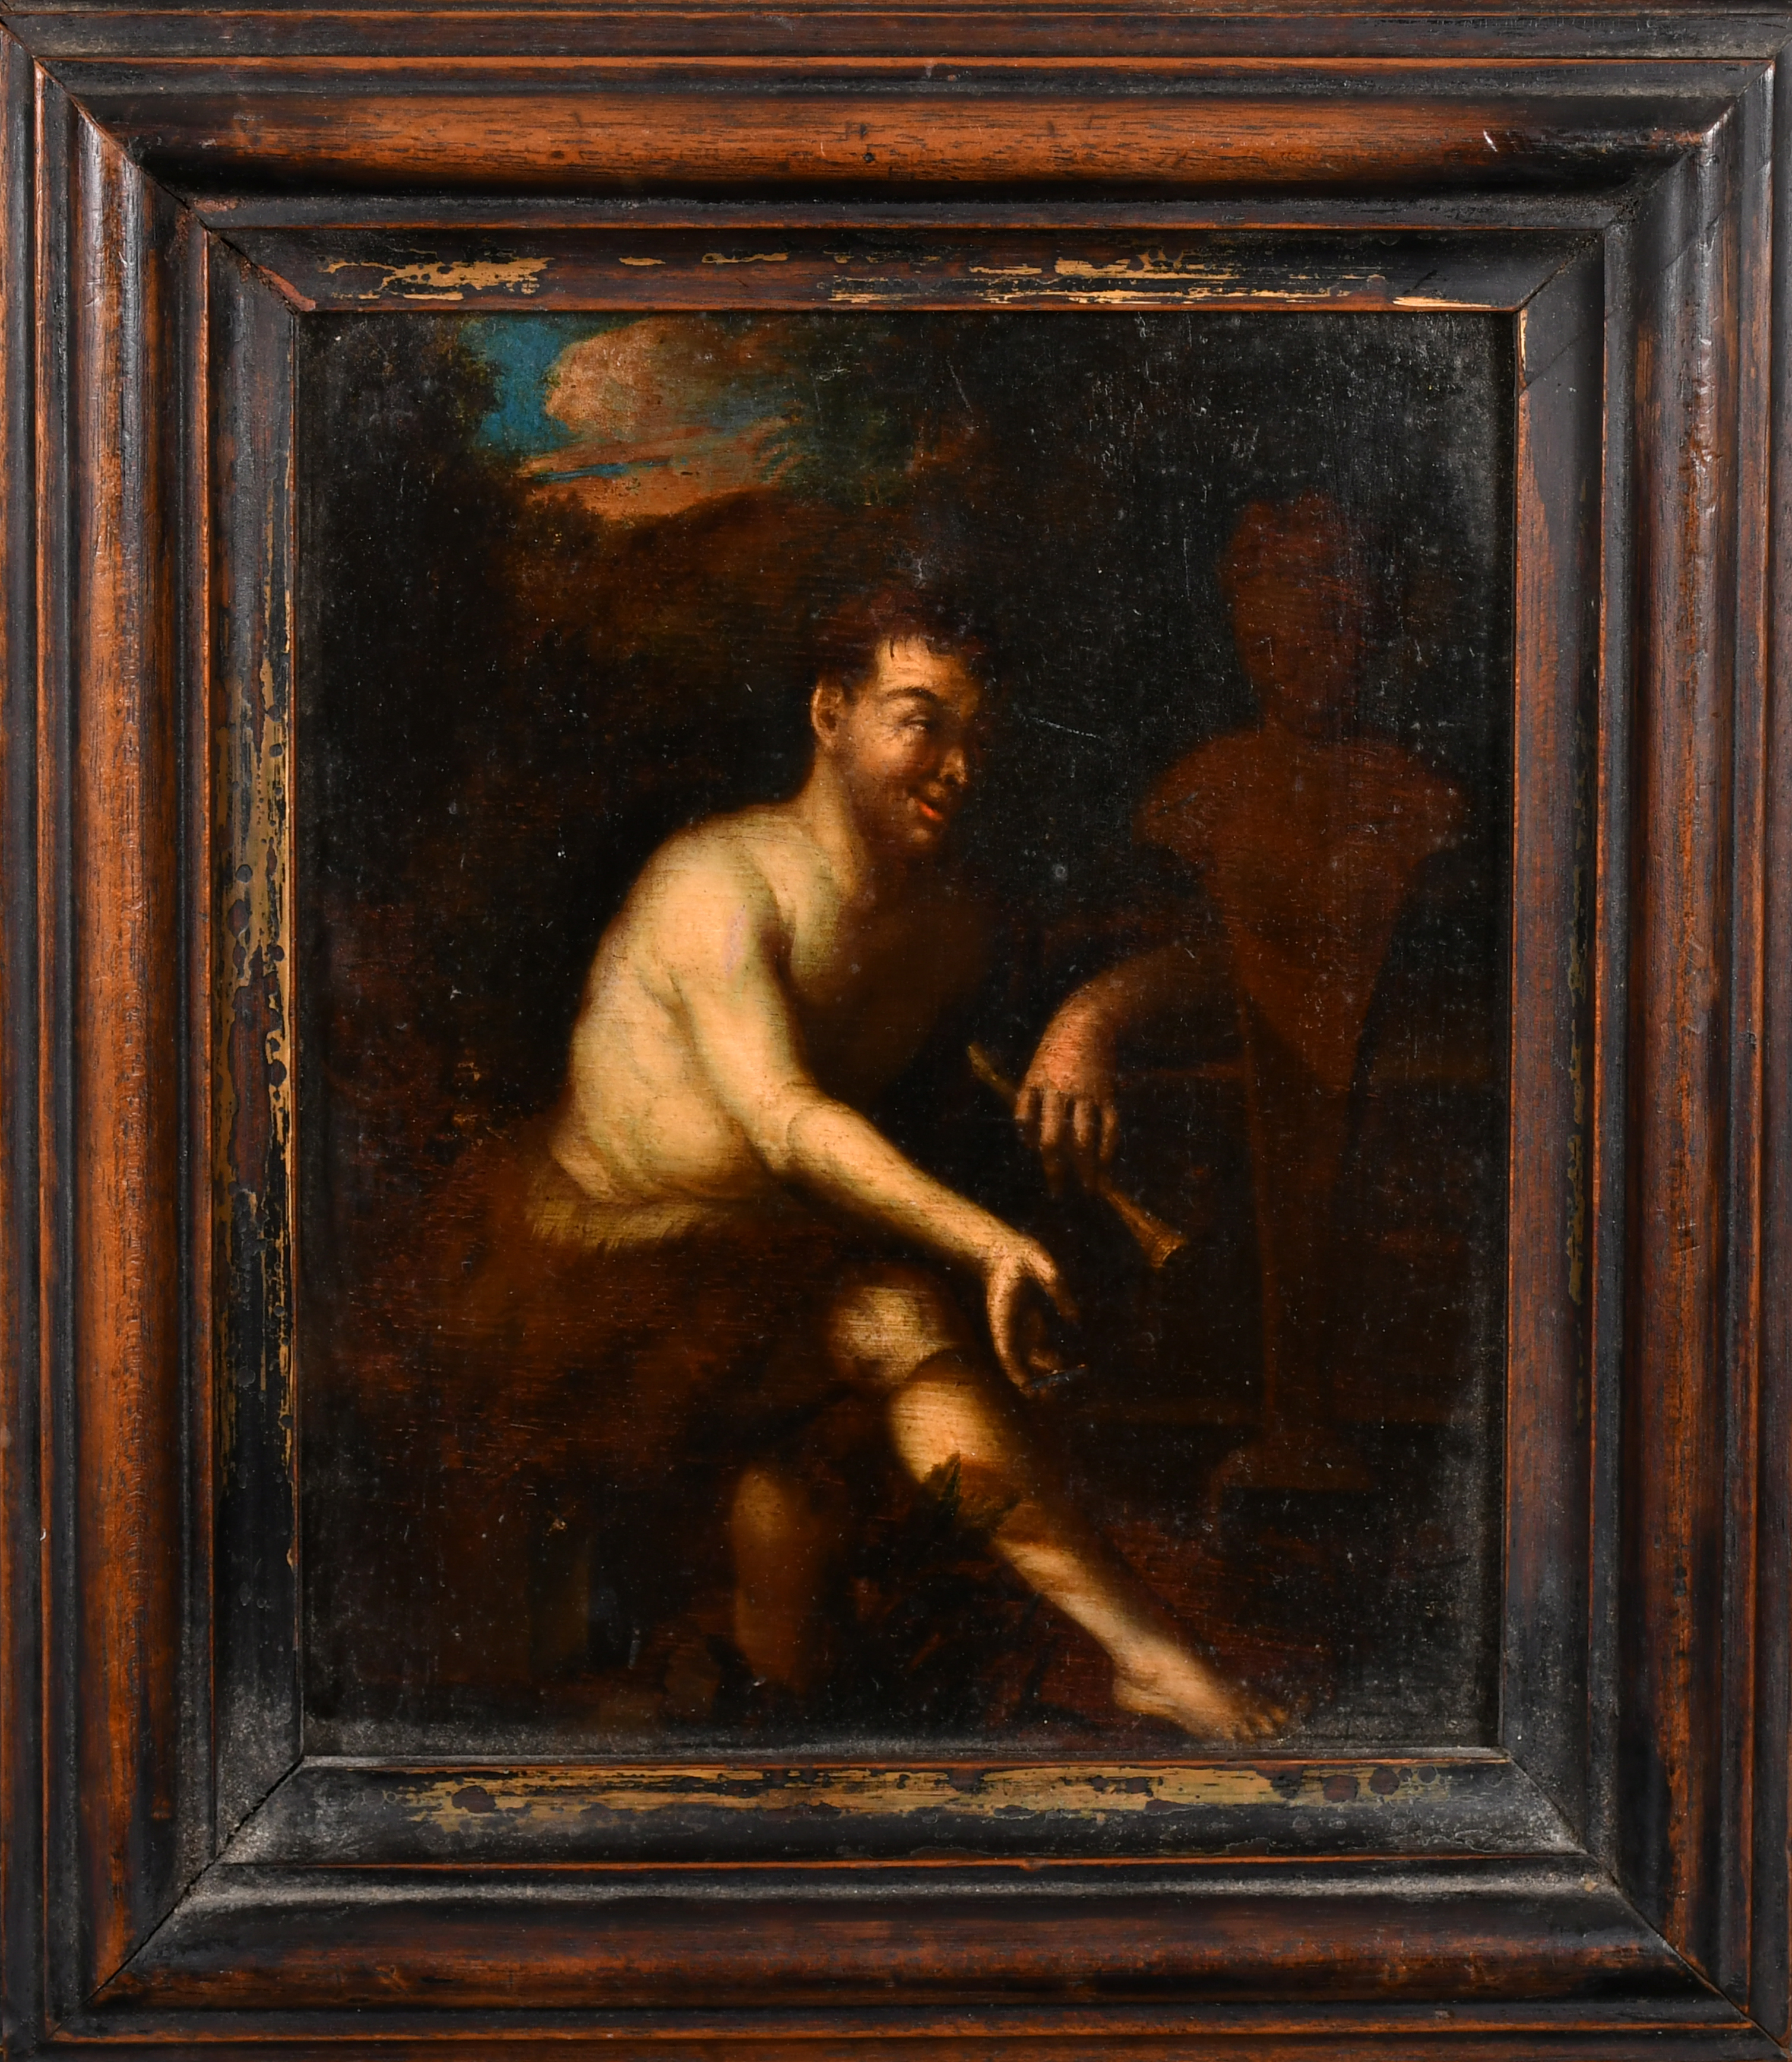 18th Century Dutch School. A Figure with a Flute, Oil on panel, 9.5" x 8" (24.1 x 20.3cm) - Image 2 of 3